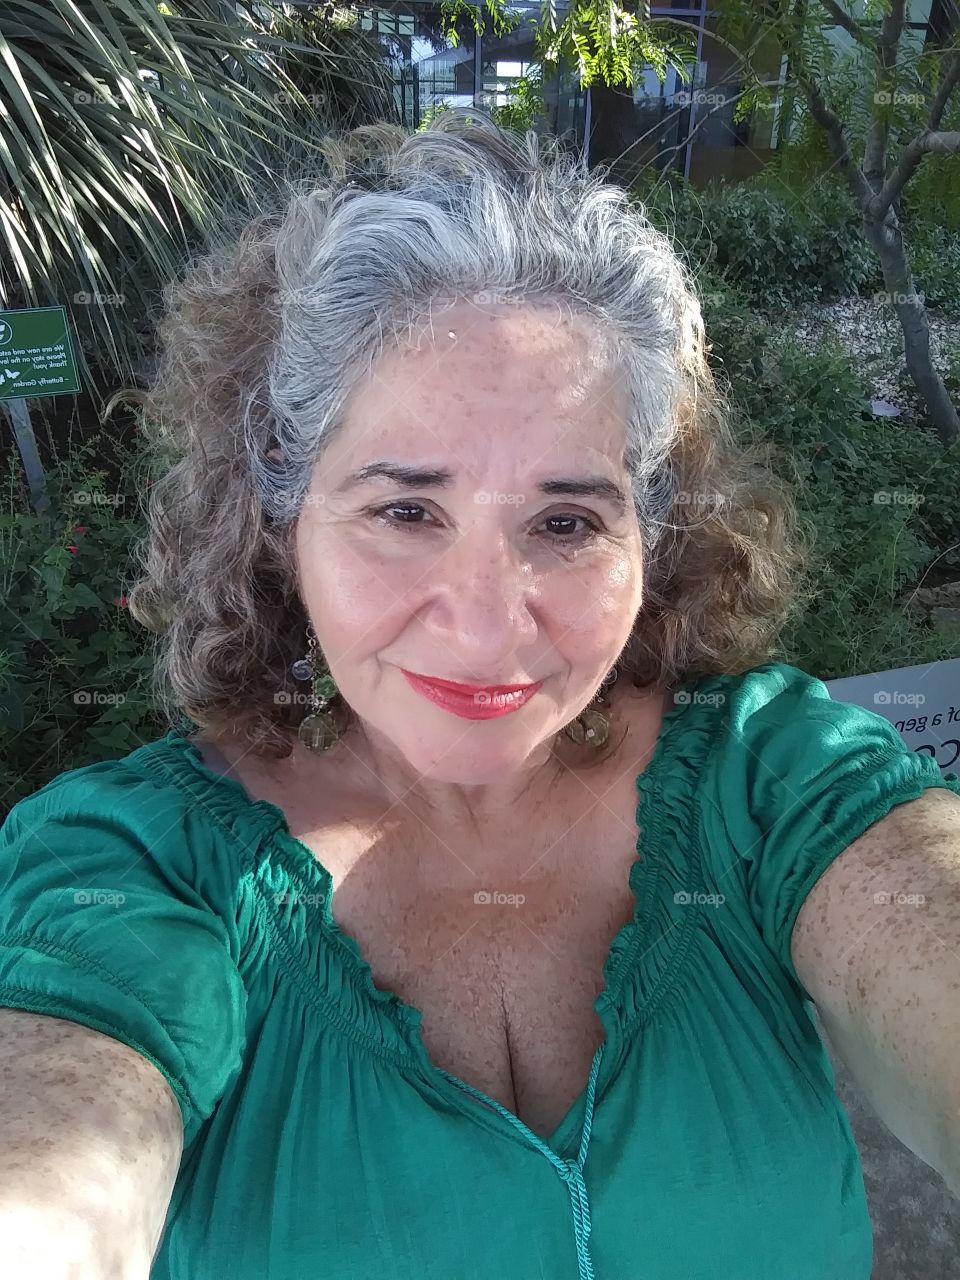 Senior Citizen, Baby boomer, Older Woman, Hispanic Woman, Older lady, sexy lady, cleavage, gray hair, freckles